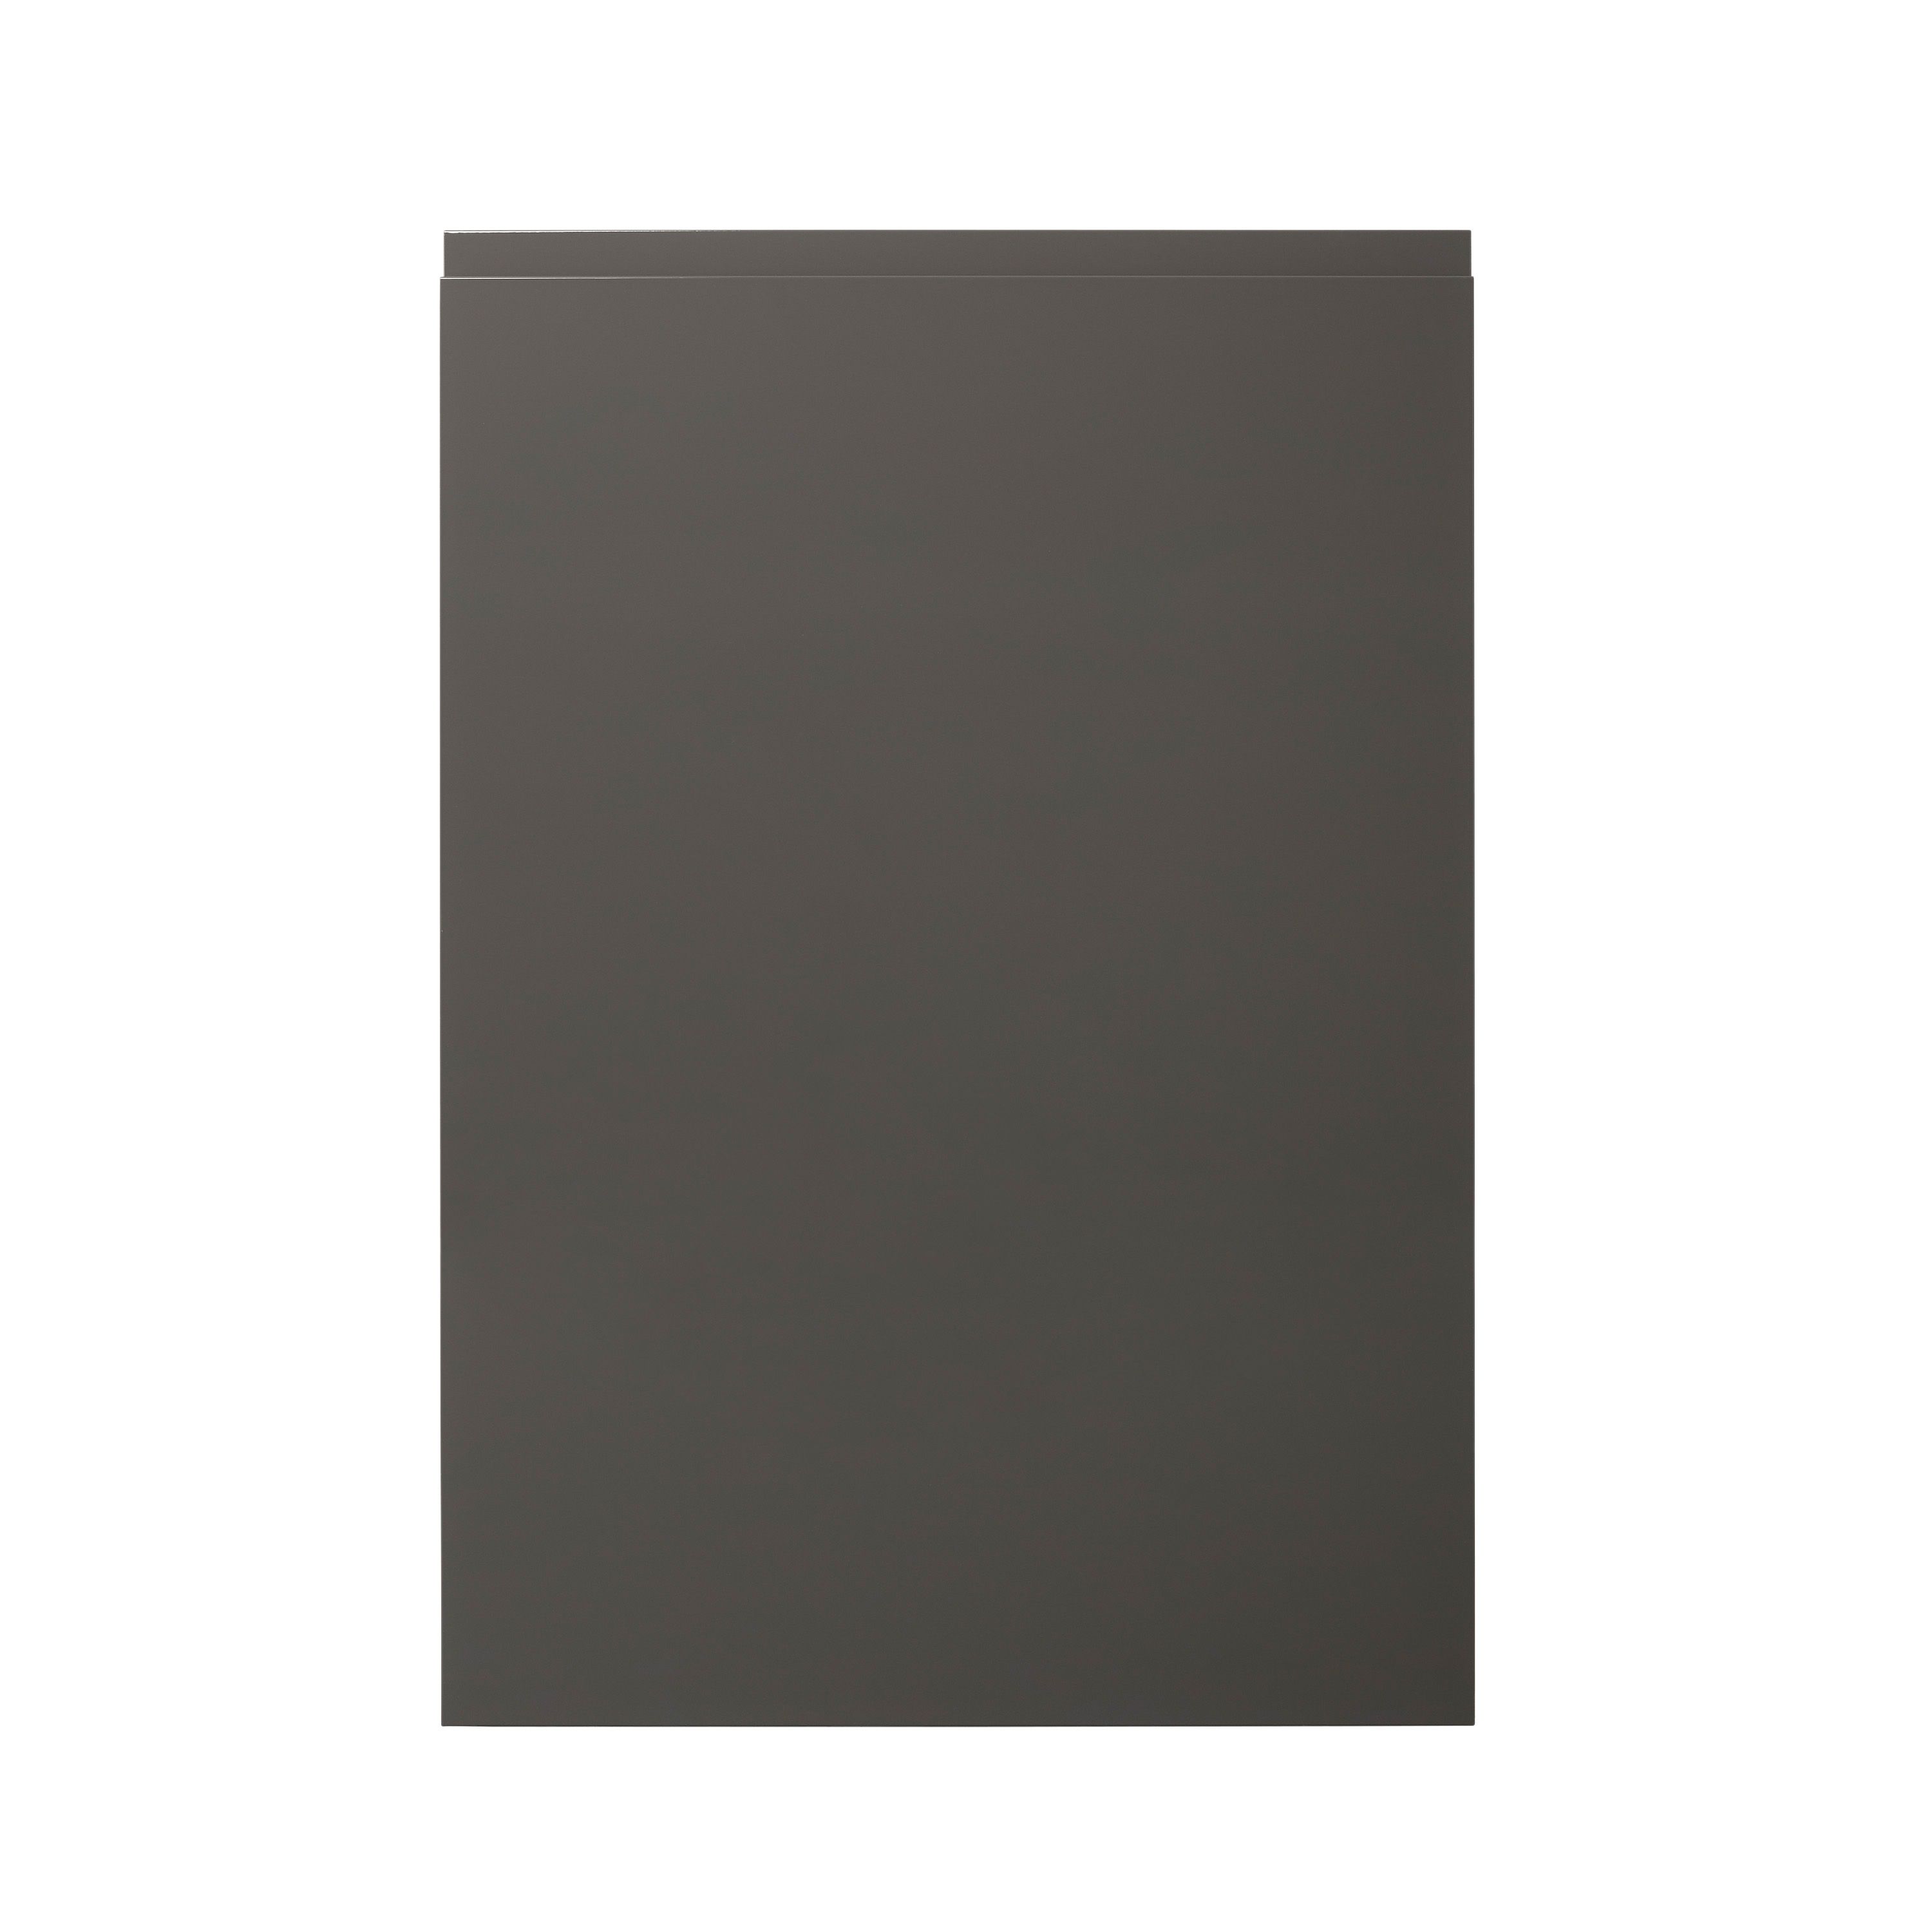 GoodHome Garcinia Gloss anthracite integrated handle Tall appliance Cabinet door (W)600mm (H)867mm (T)19mm